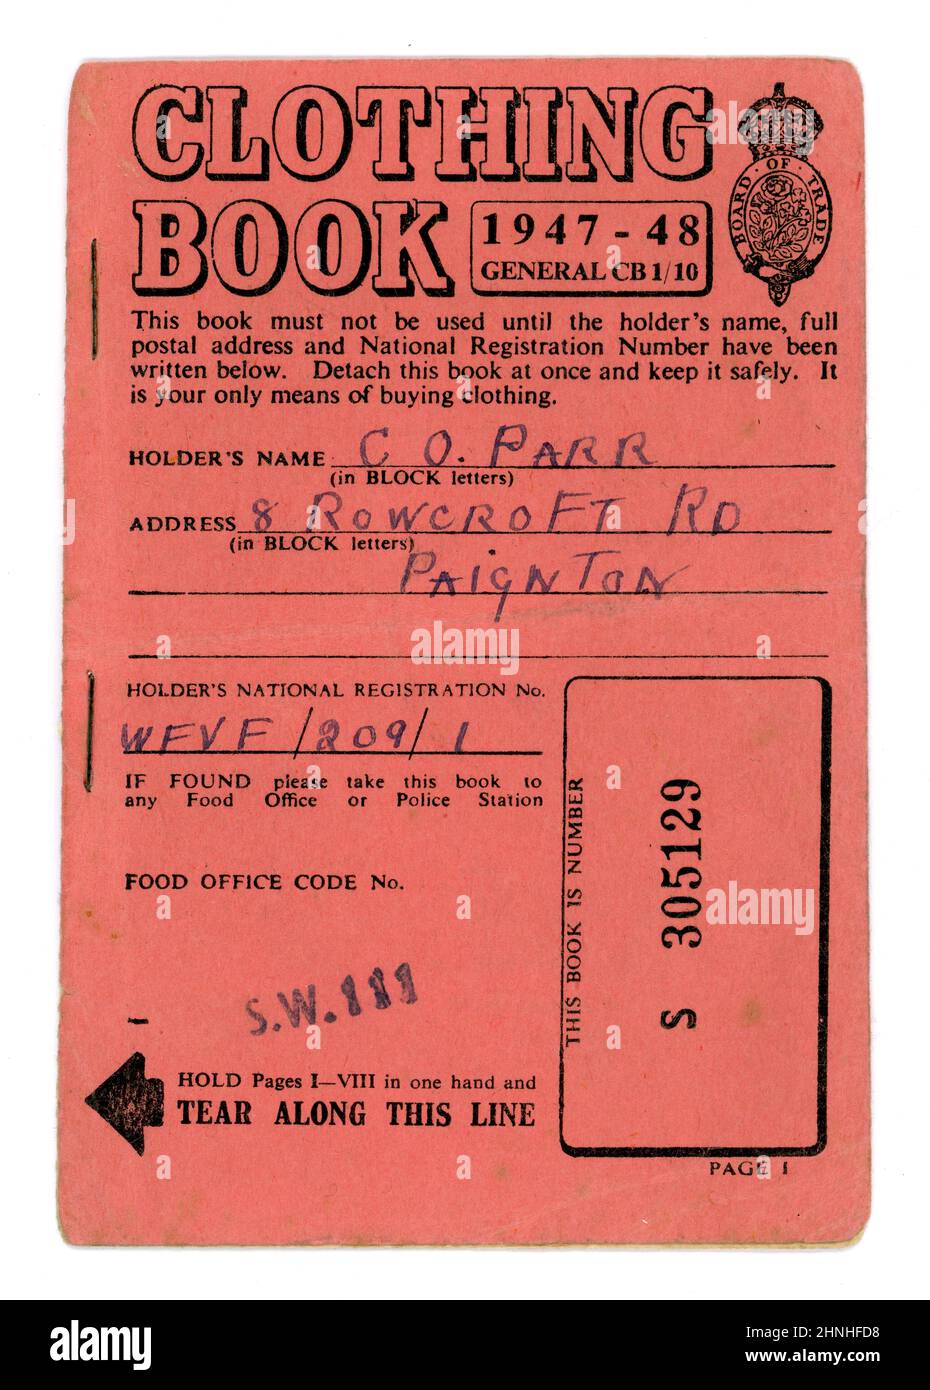 Original clothing ration book dated 1947-1948. Clothes rationing didn't end until 15 March 1949. U.K. Stock Photo